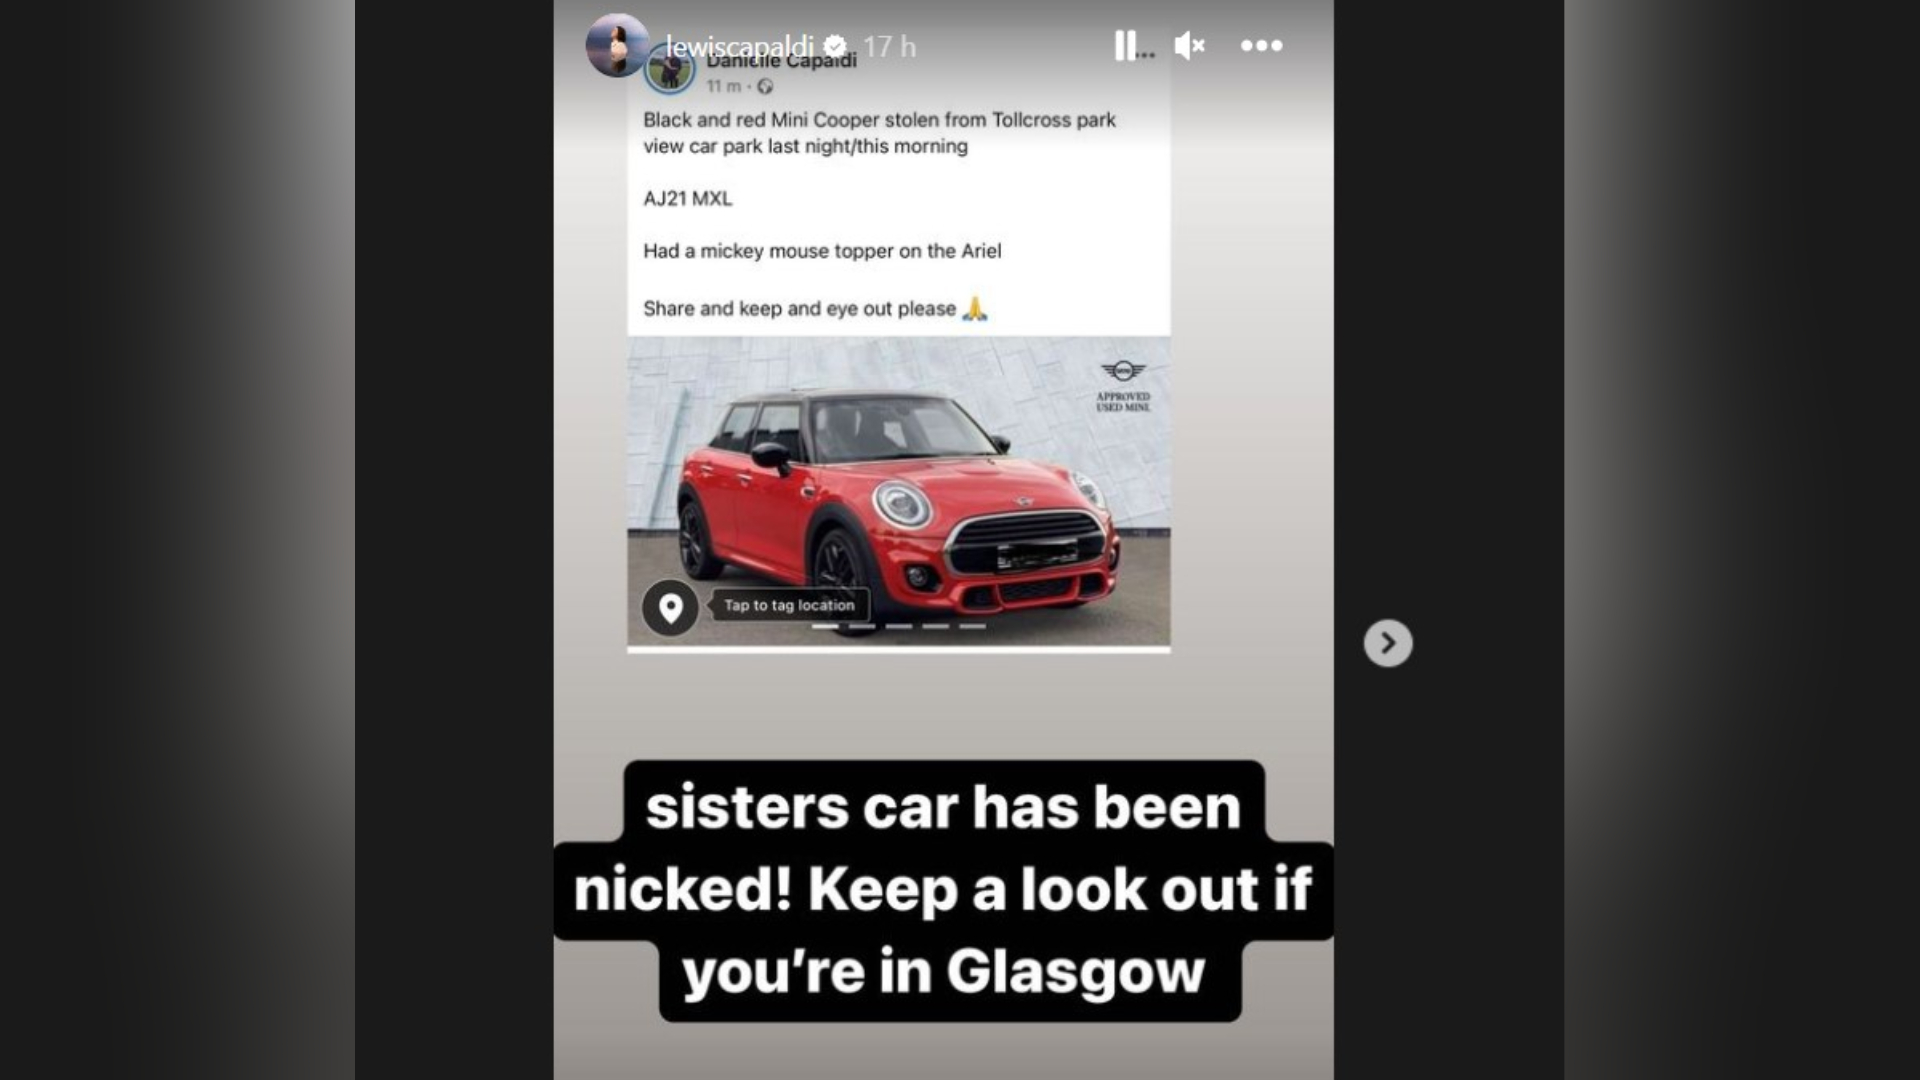 Lewis Capaldi issued the appeal on Instagram